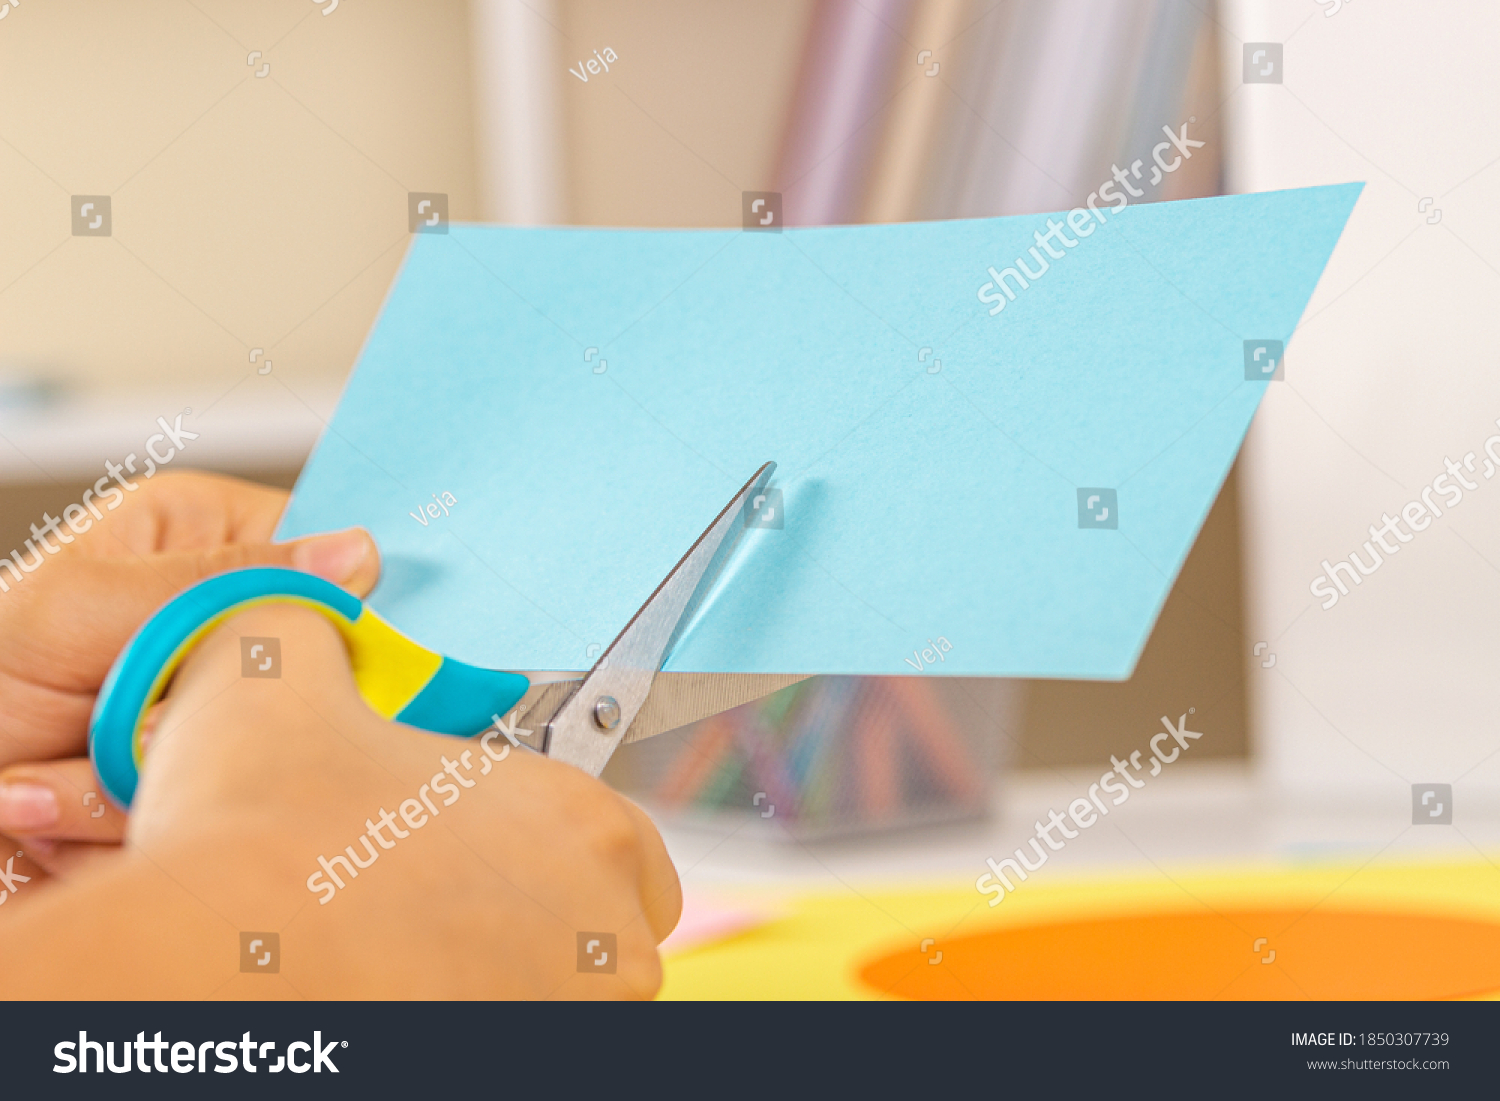 Kid hands cutting light blue colored paper with scissors. Education, learning, paper craft, entertainment #1850307739